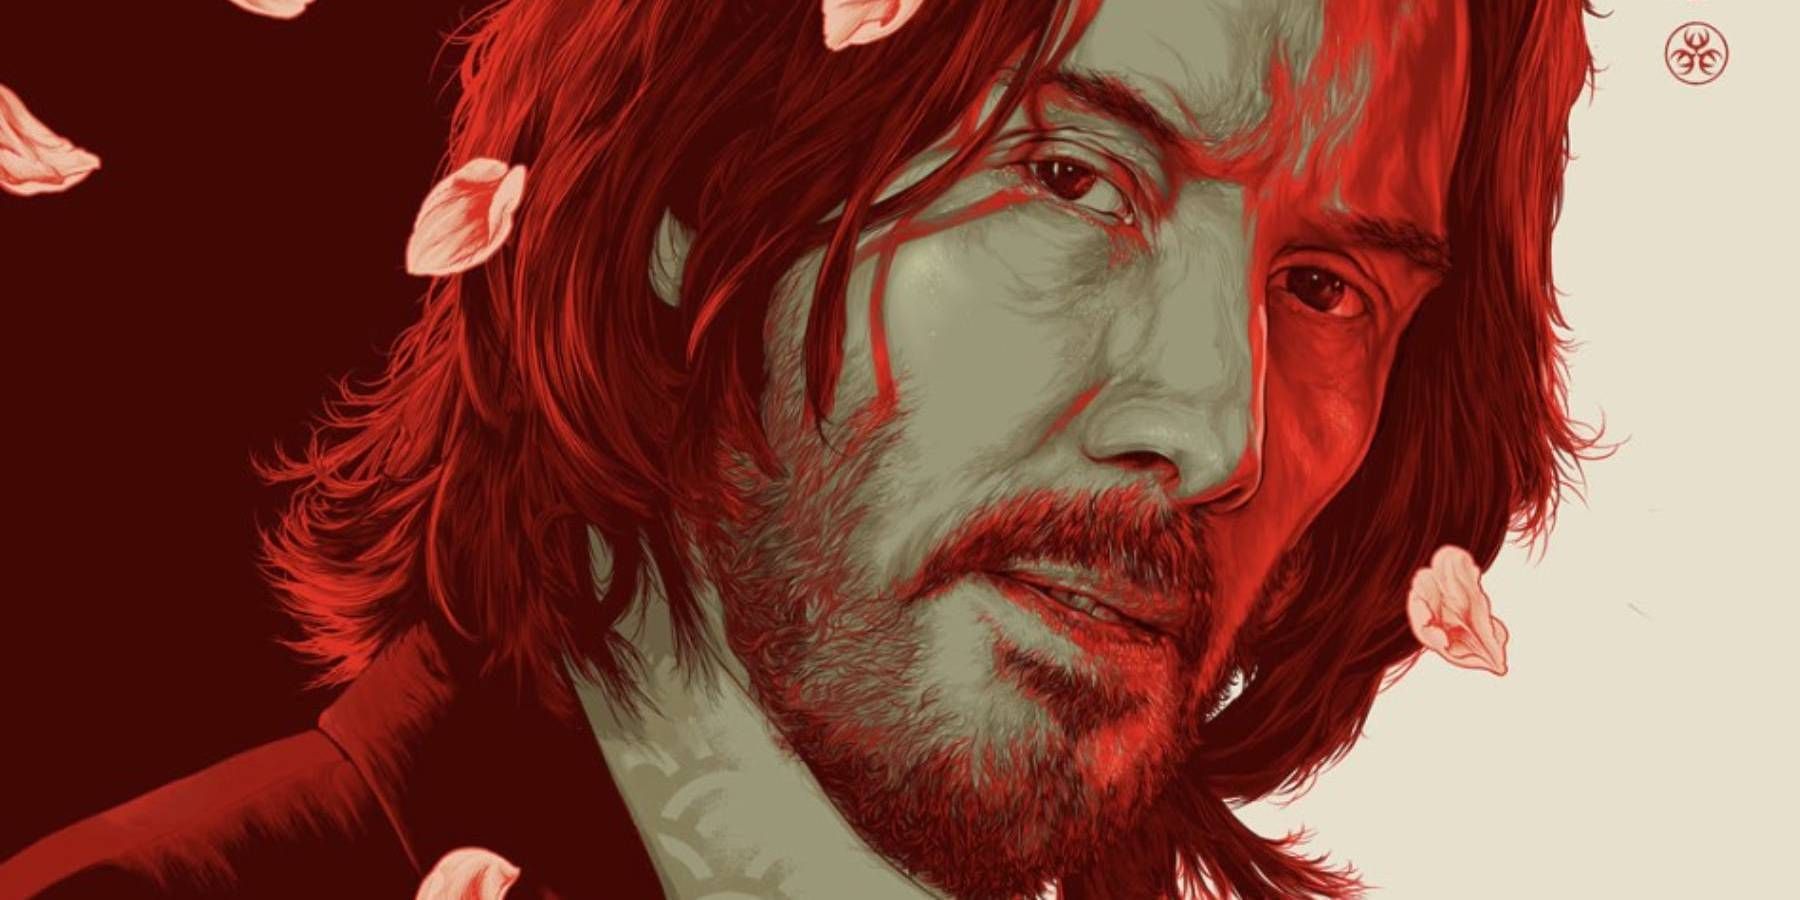 John Wick: Chapter 4 Keanu Reeves Japanese cherry blossom illustration art style poster